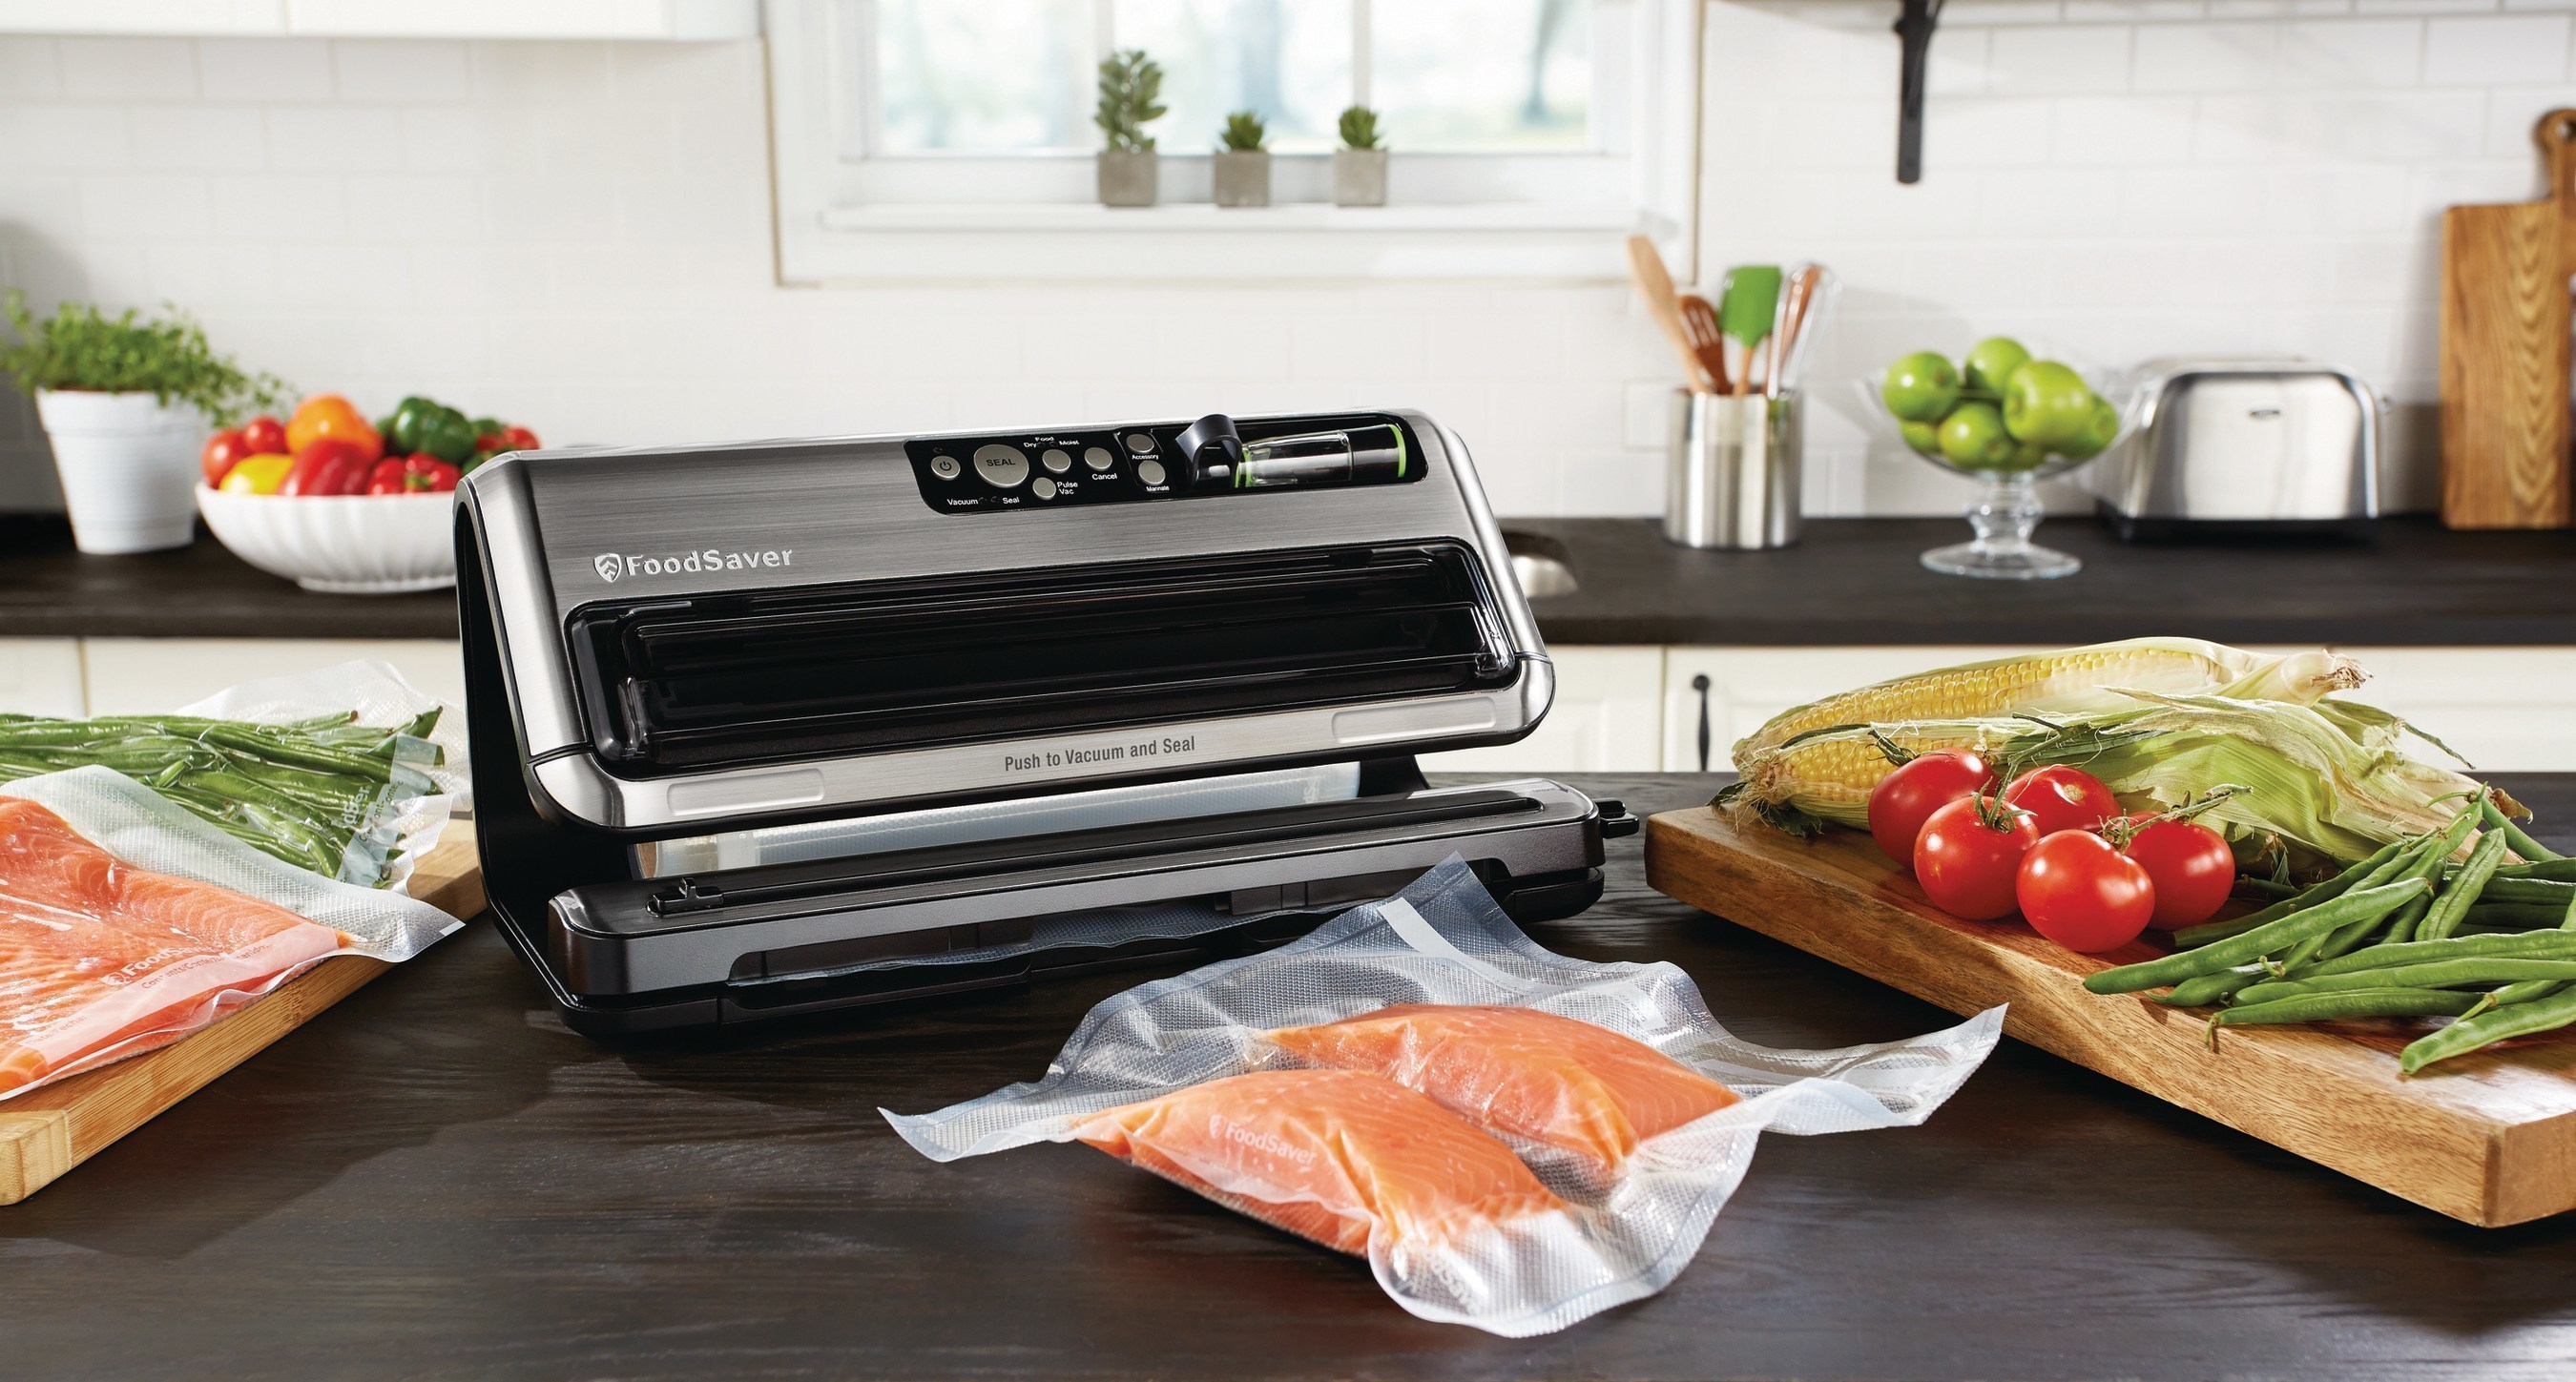 Introducing the NEW FoodSaver(R) FM5000 Series Food Preservation System